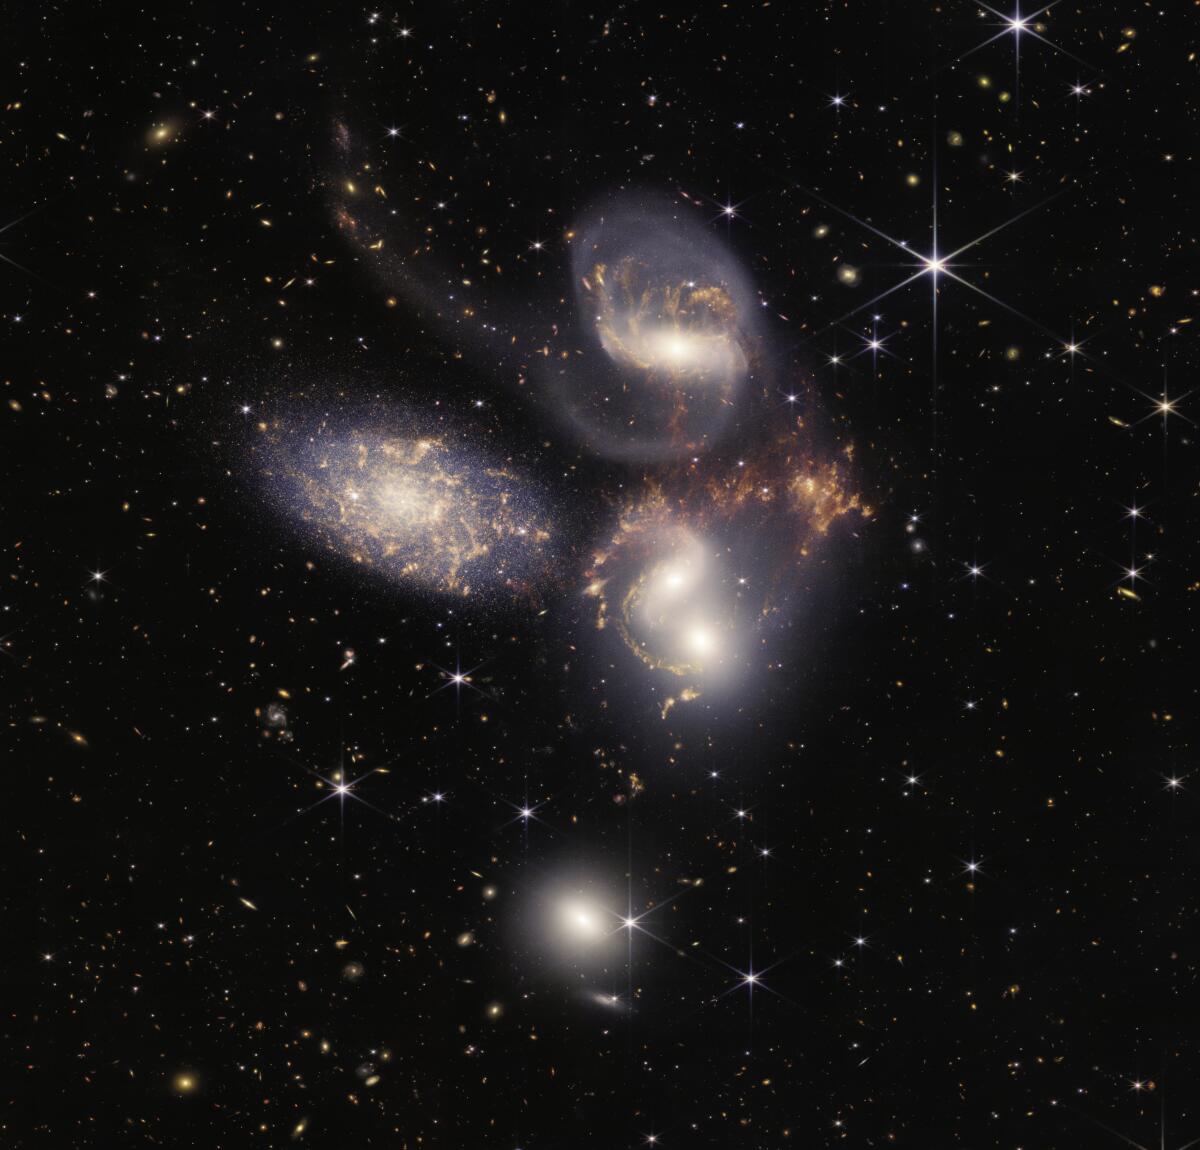 An enormous mosaic of Stephan's Quintet of galaxies, as pictured by NASA's James Webb Space Telescope.